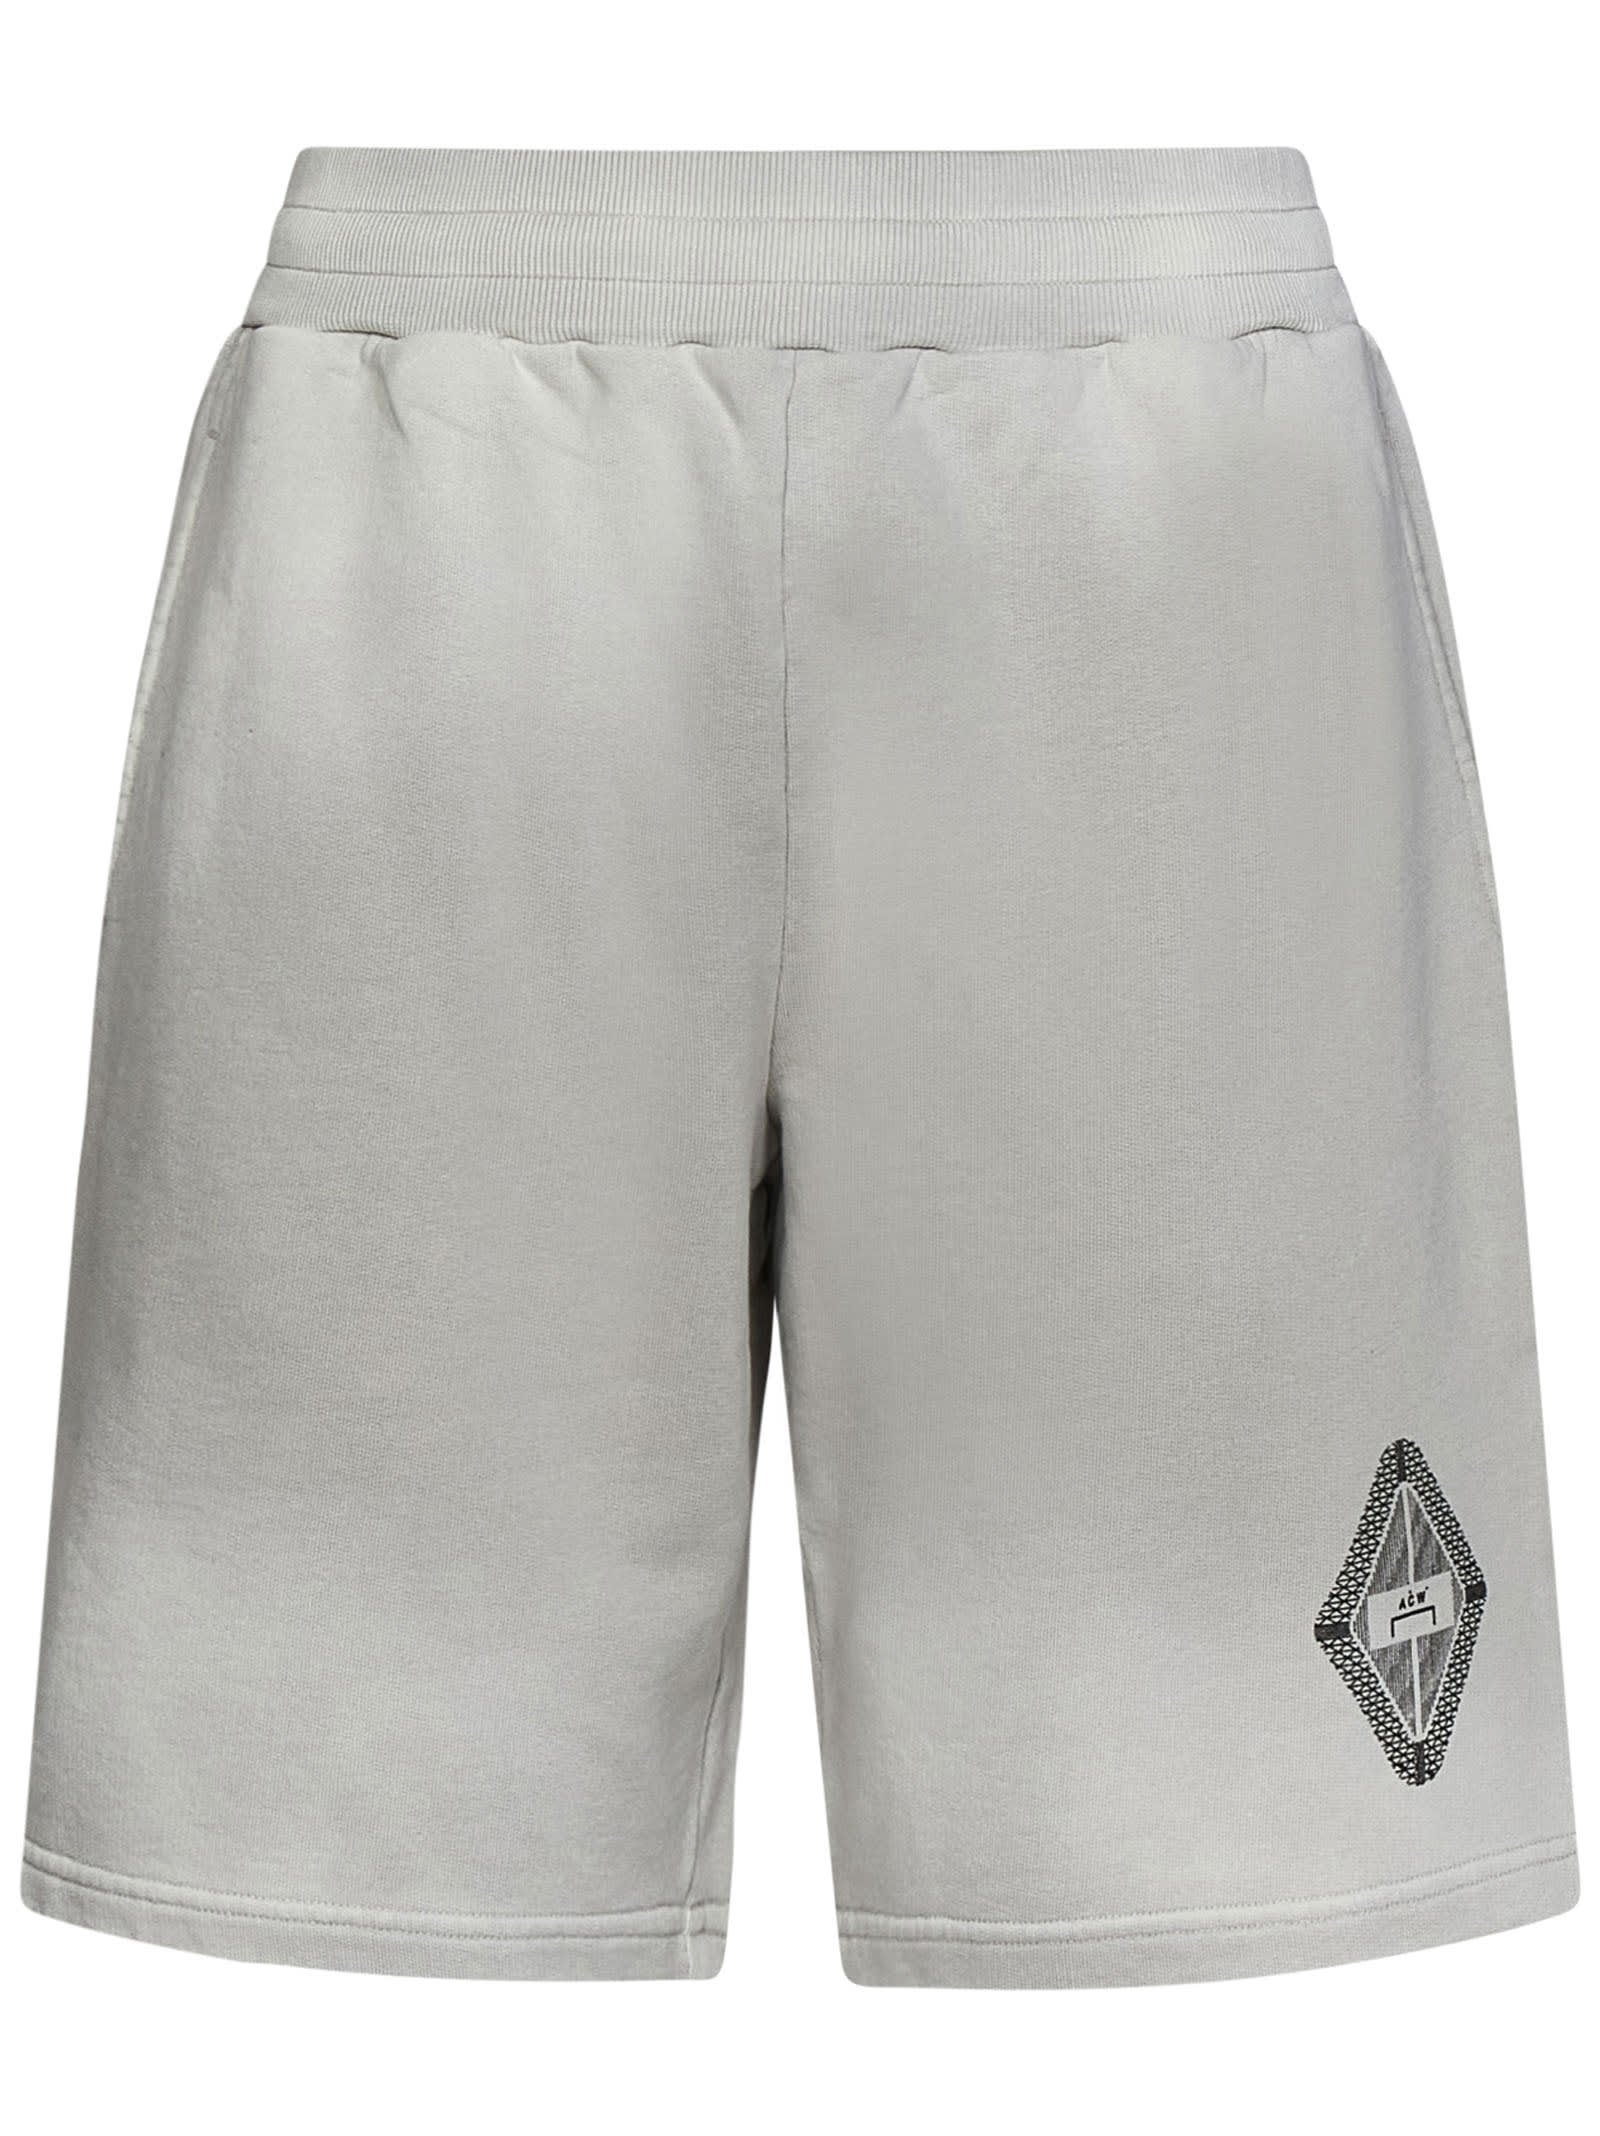 A-COLD-WALL* GRADIENT SHORTS